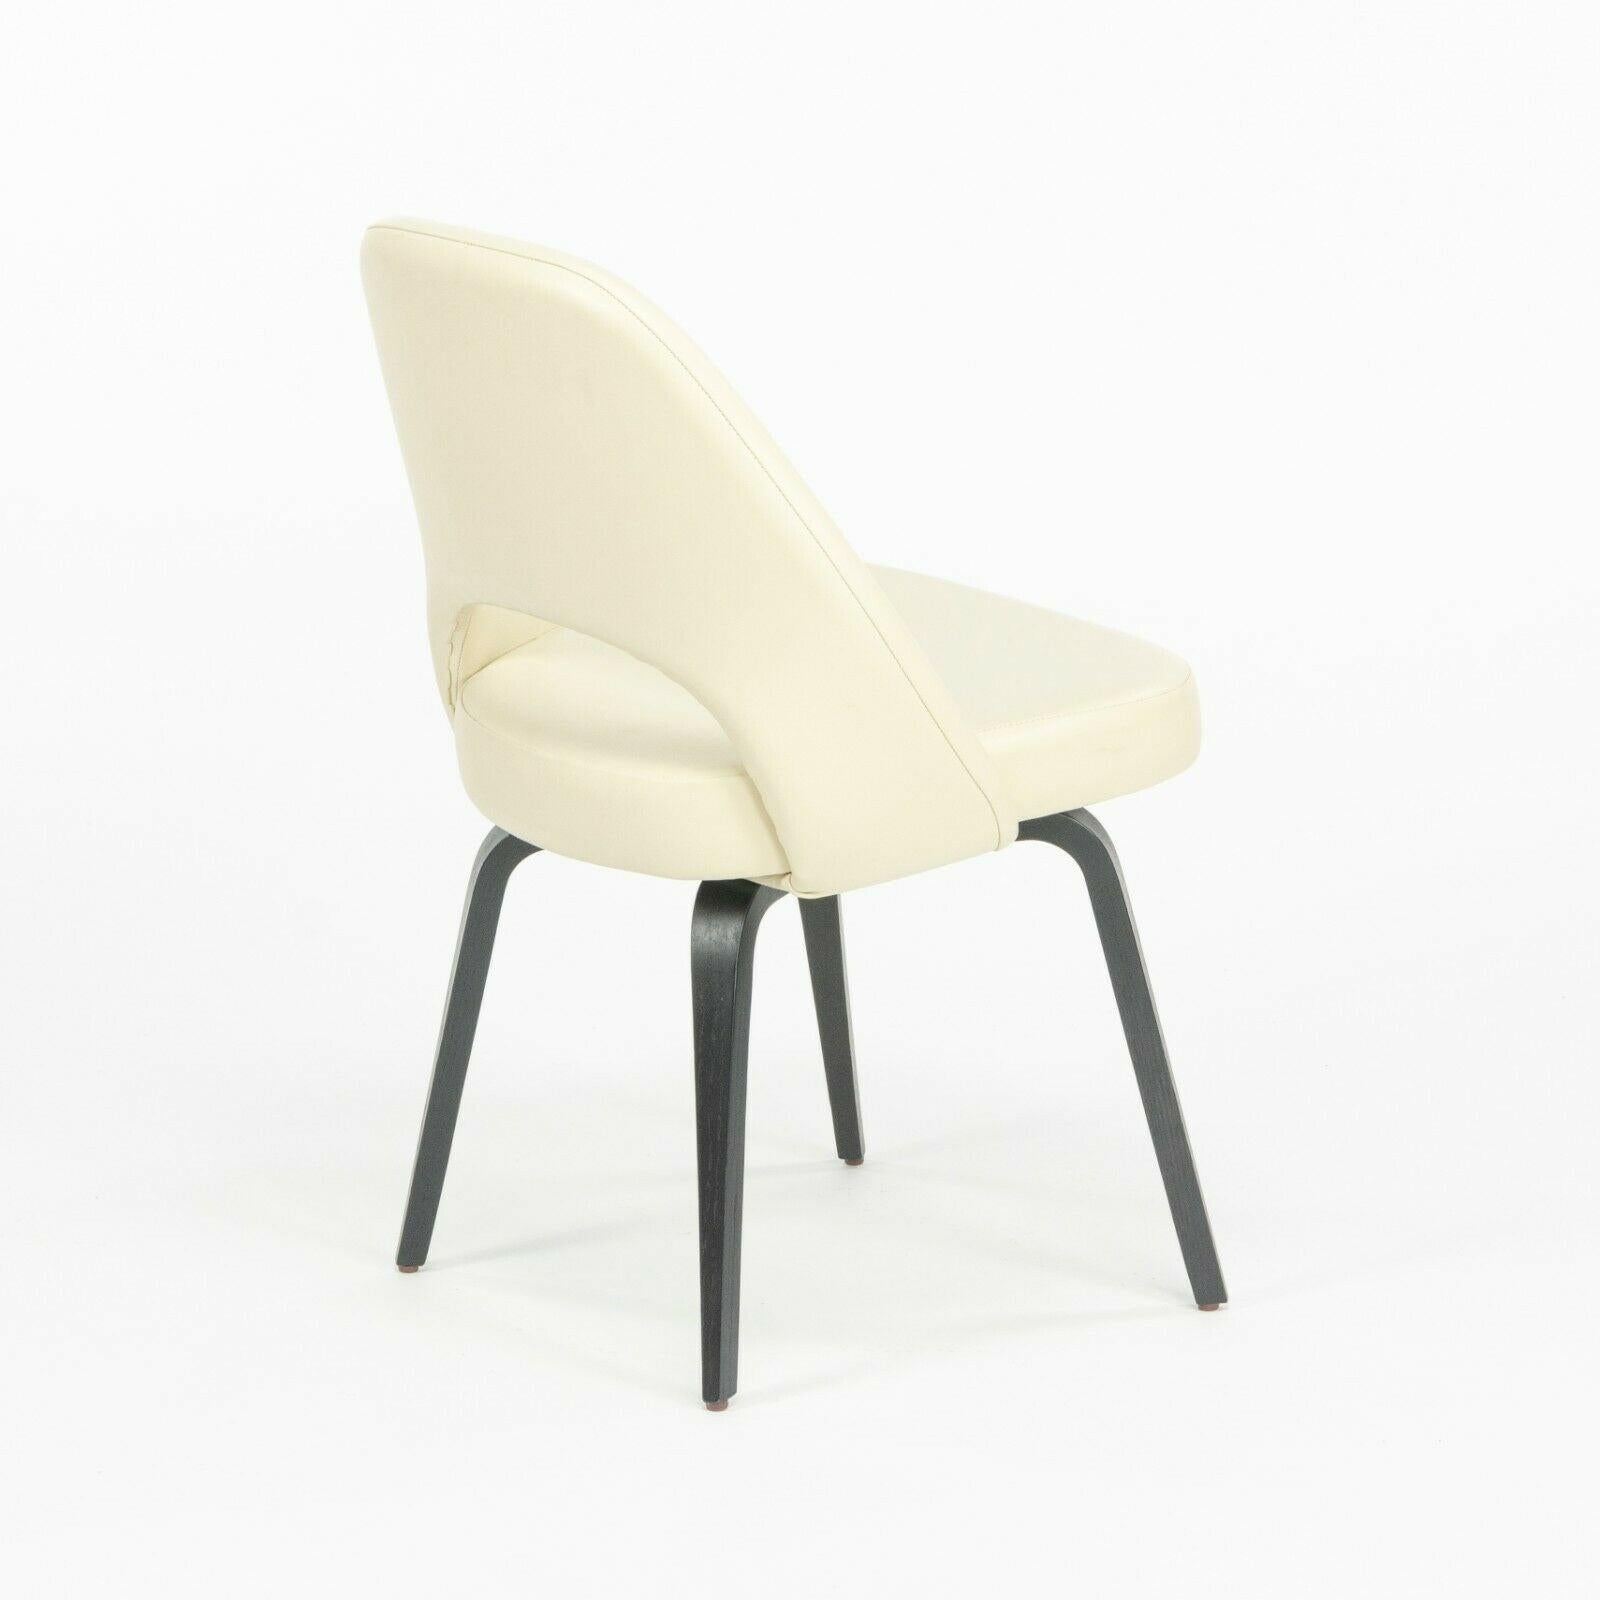 Eero Saarinen Knoll 2020 Executive Side Chair w/ Wood Legs & Ivory Leather In Good Condition For Sale In Philadelphia, PA